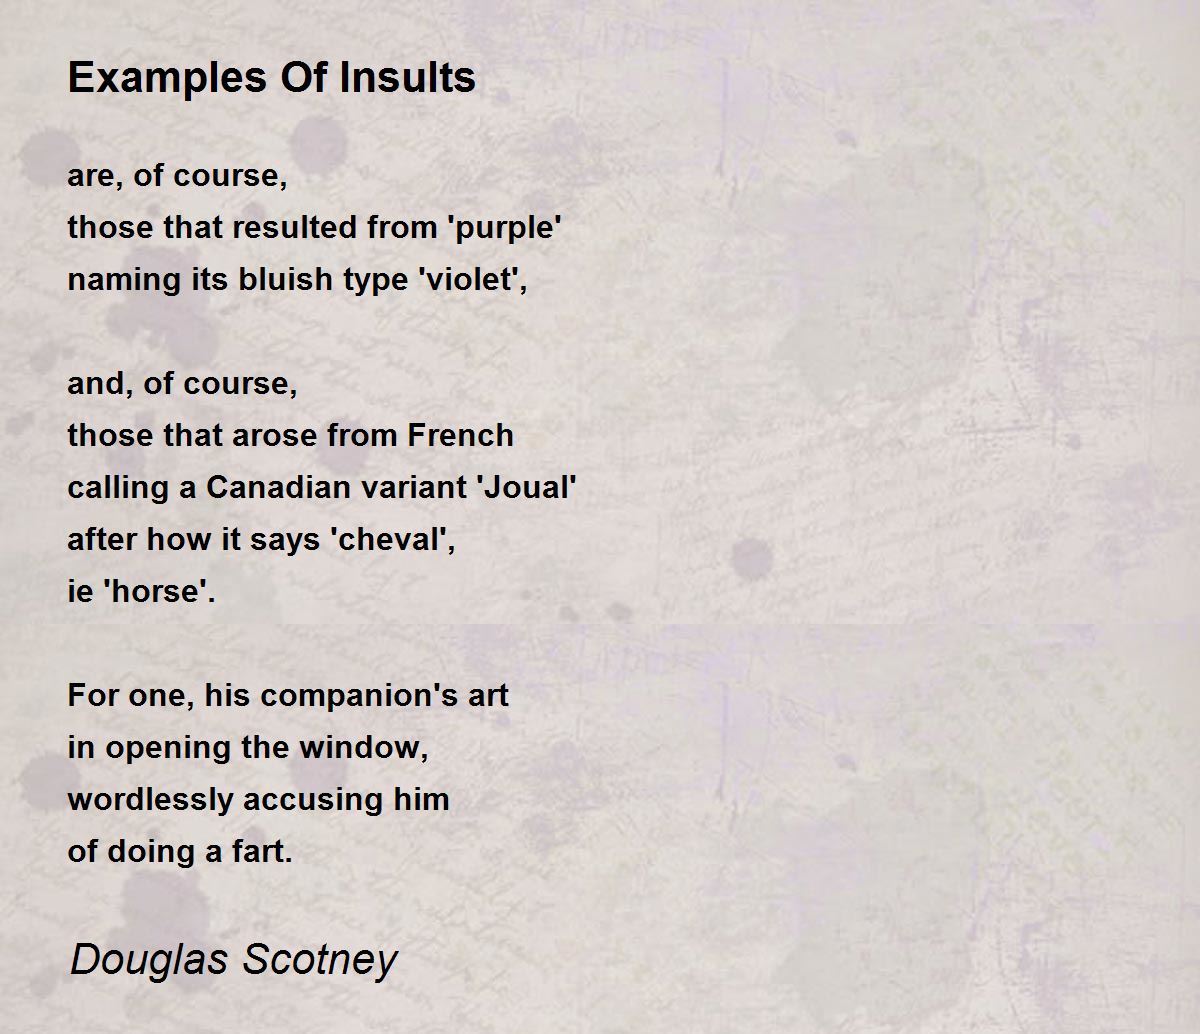 Examples Of Insults Poem By Douglas Scotney